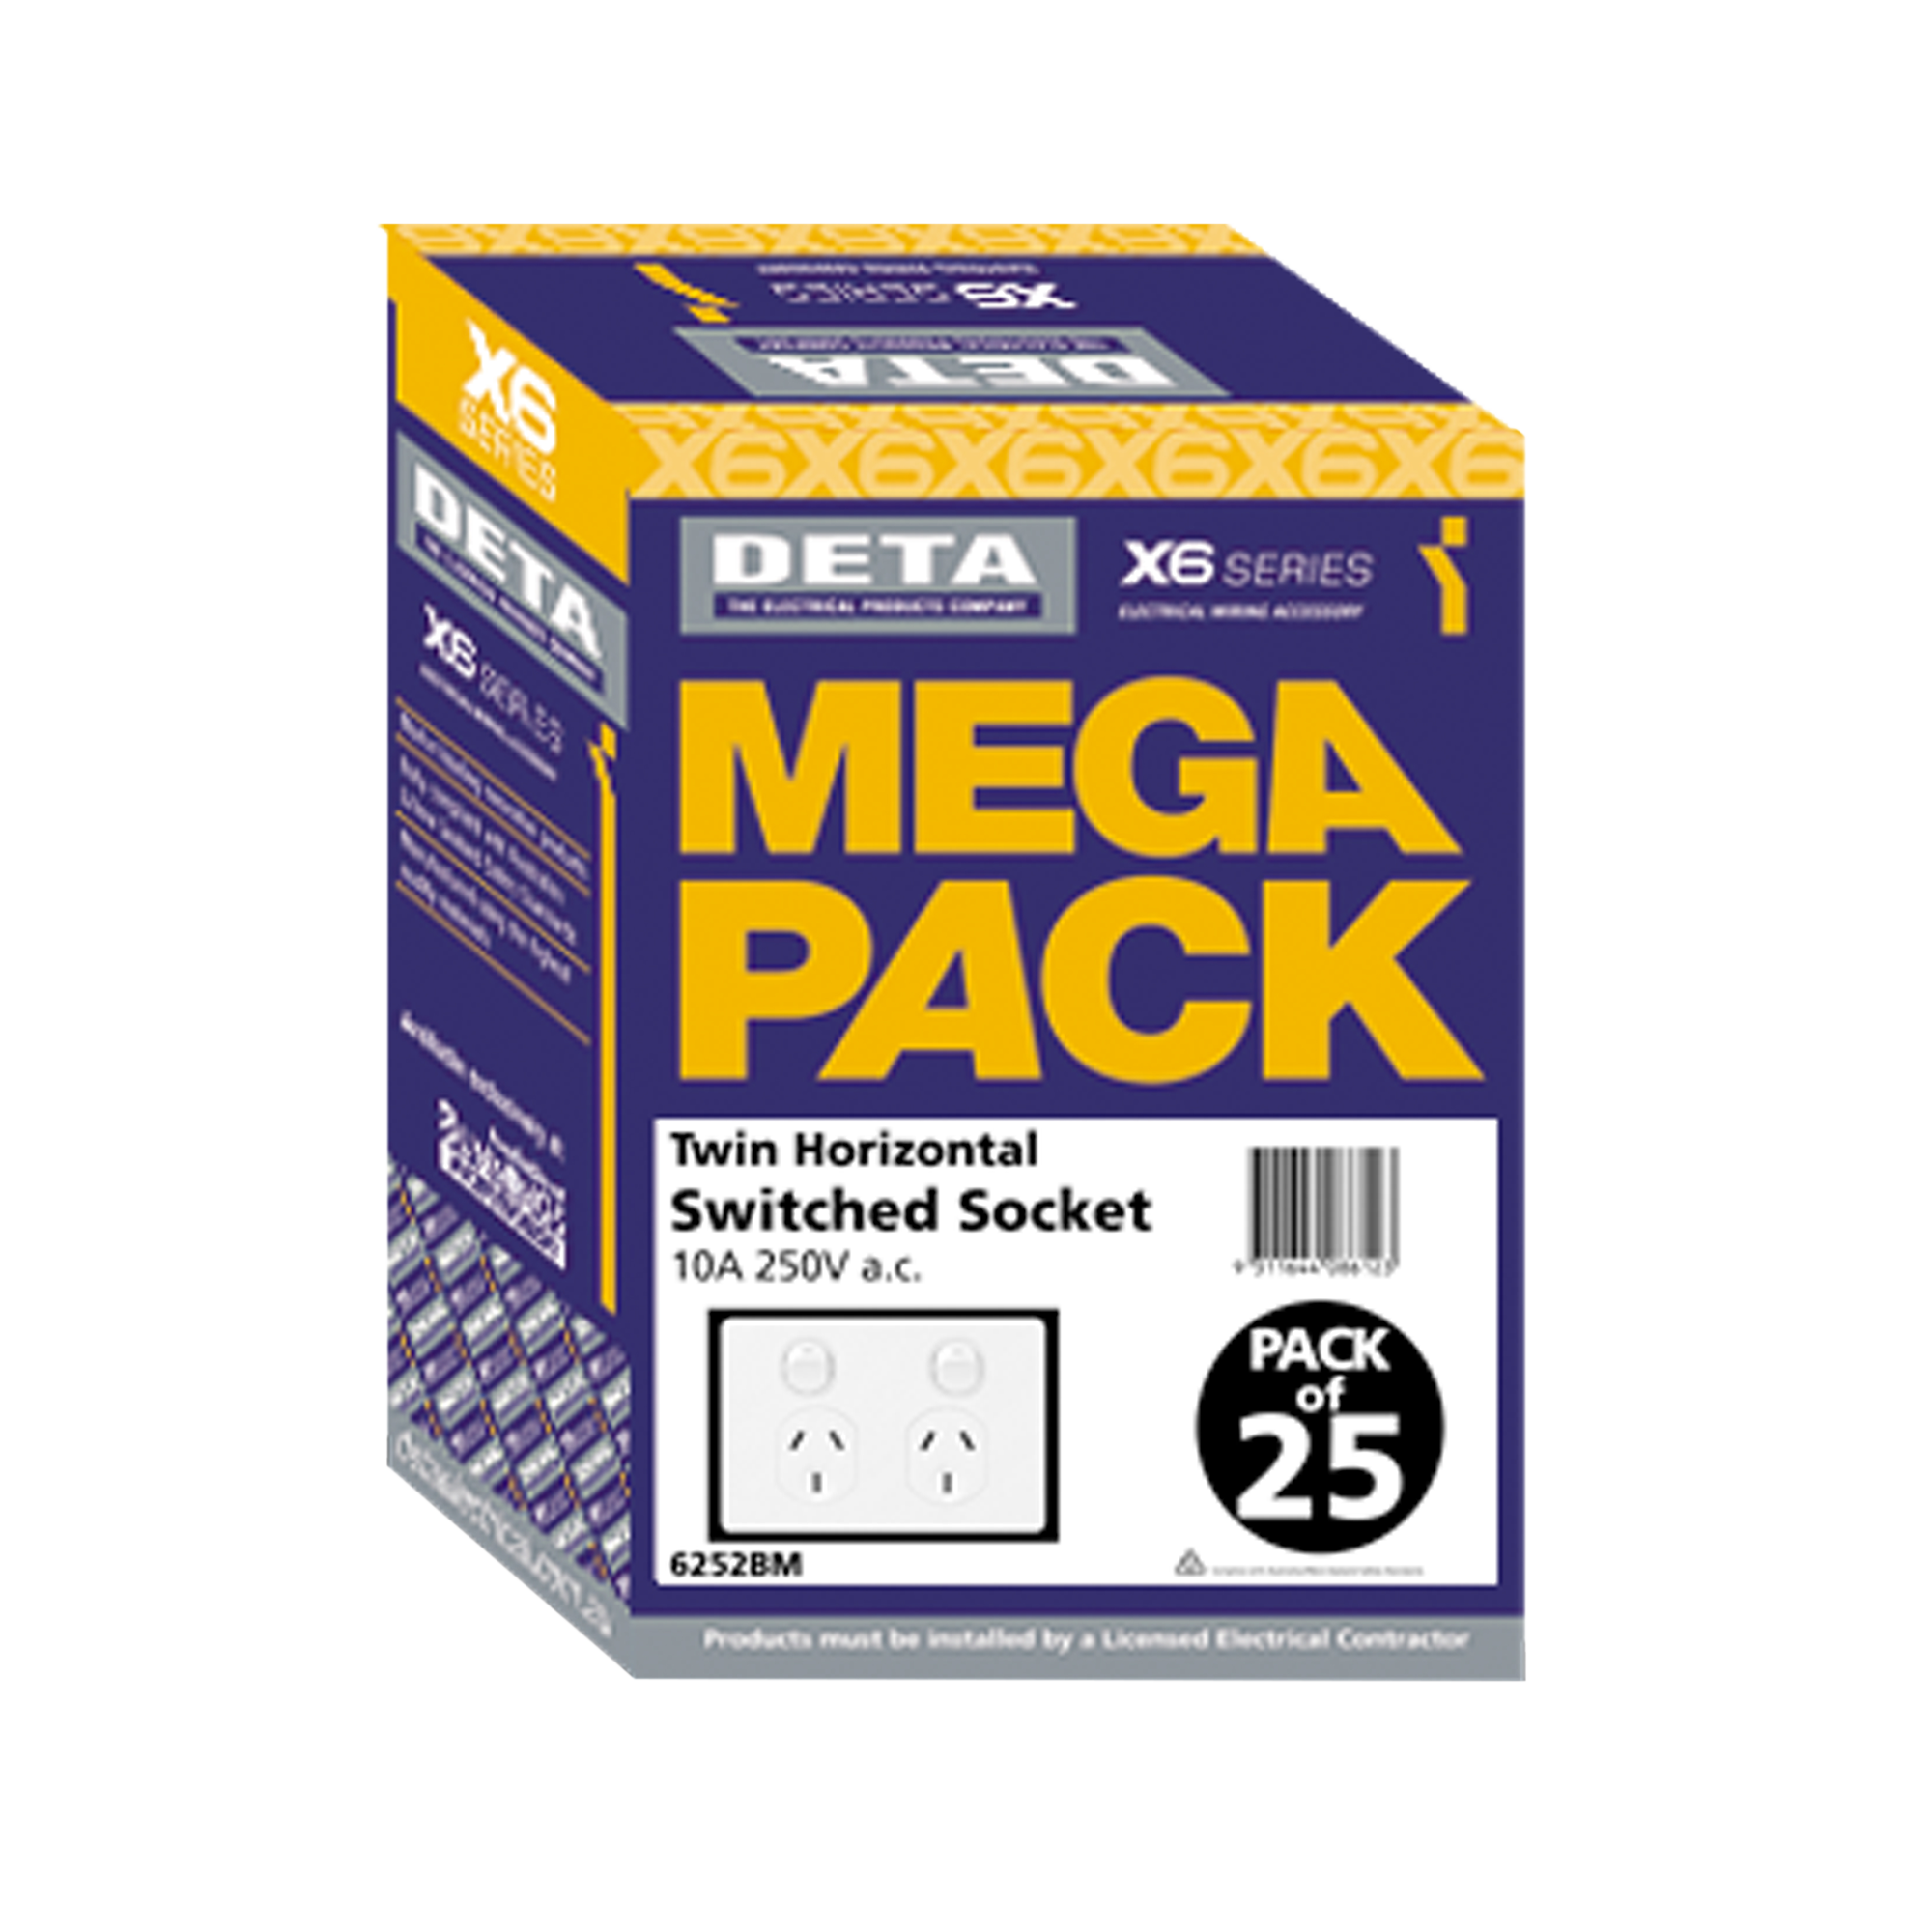  Double power point pack of 25